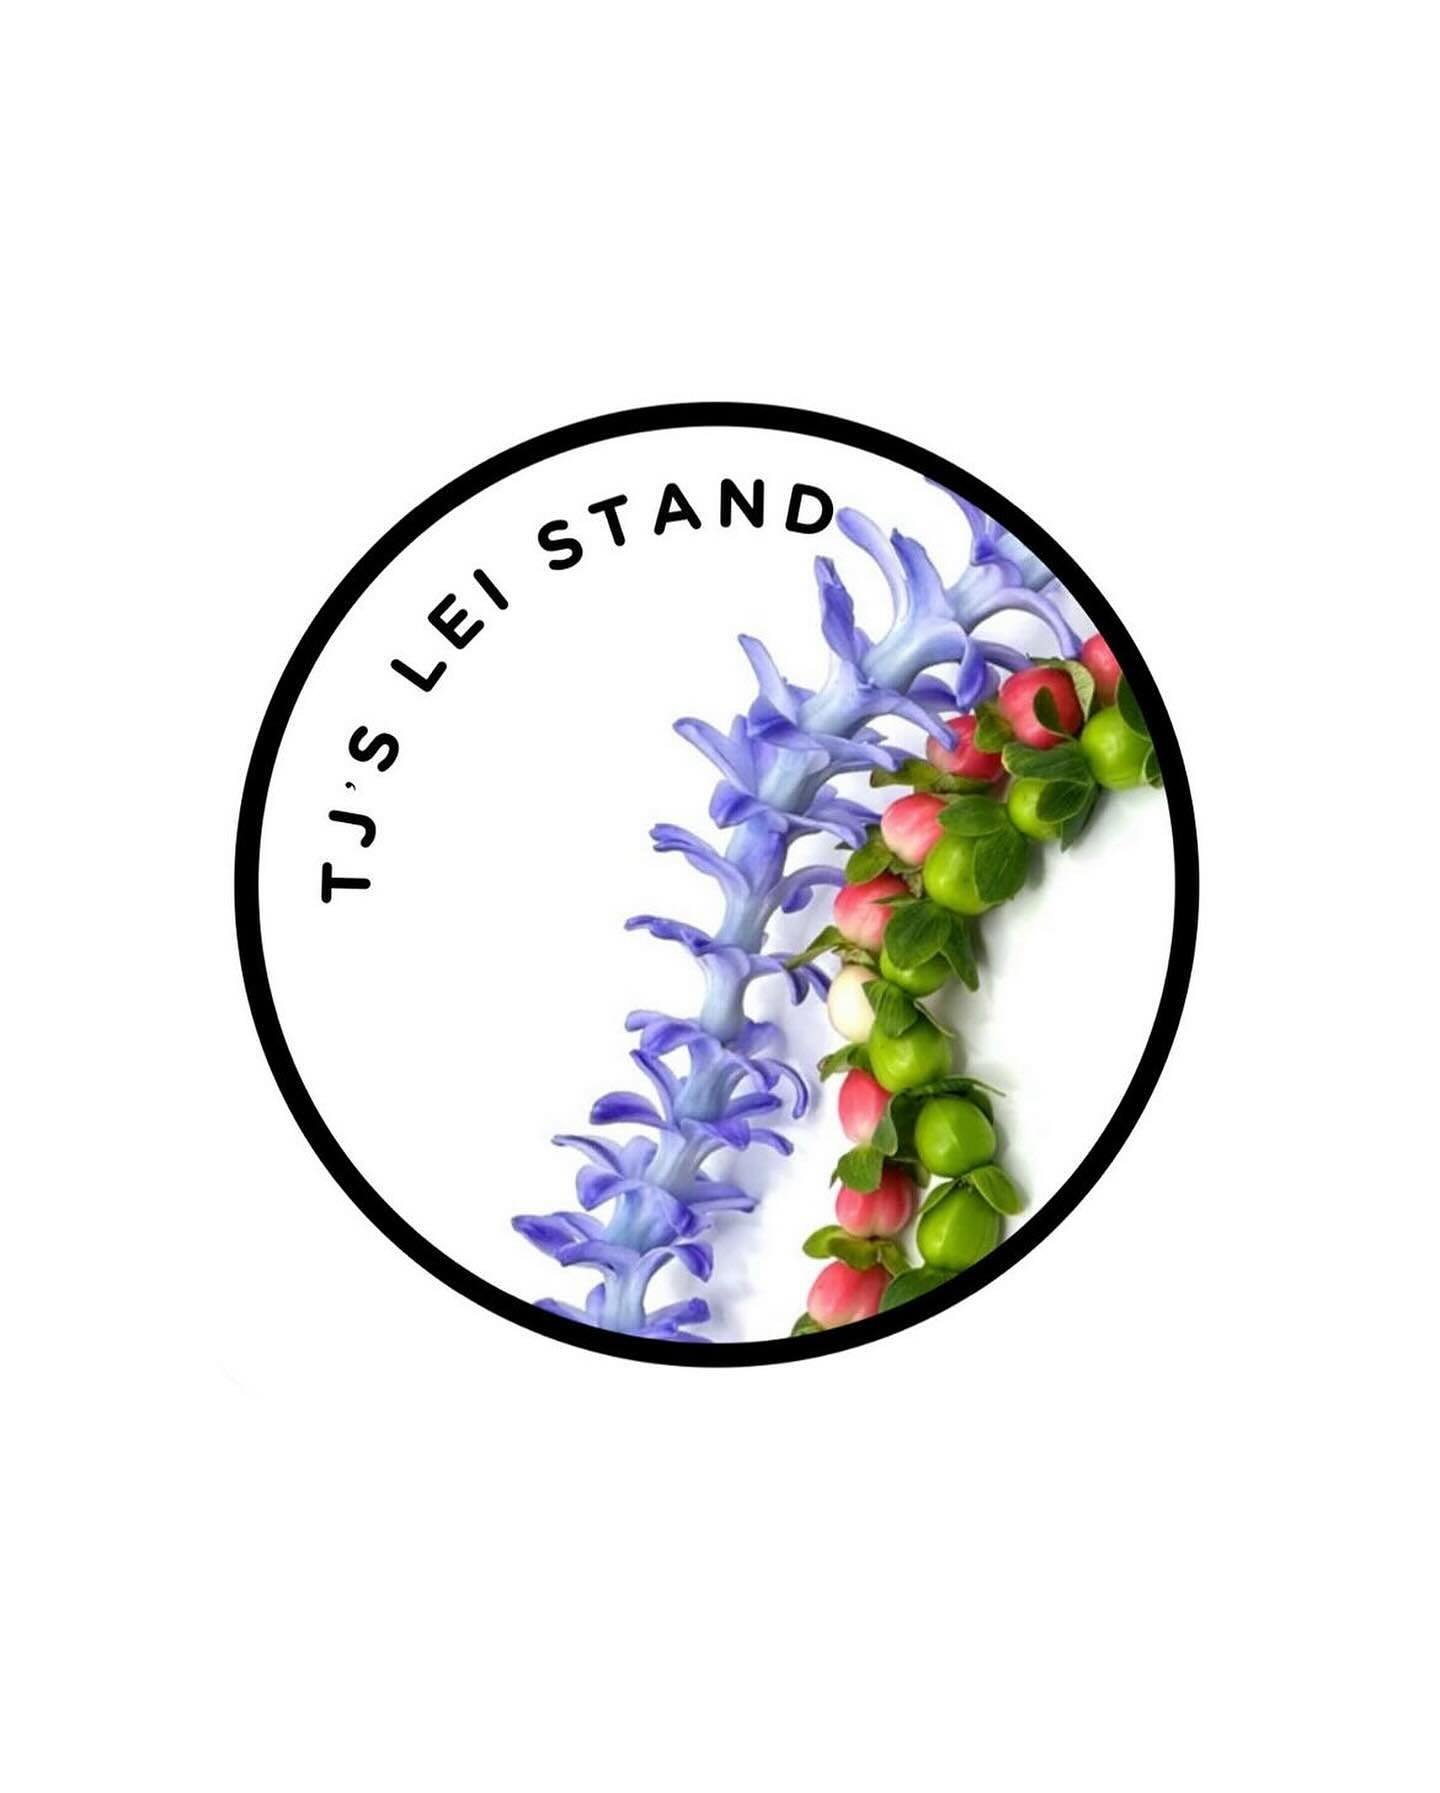 Kicking off our countdown to A Lei For Mama, here we have our first Vendor Highlight, TJ&rsquo;s Lei Stand. 

Here you&rsquo;ll find a variety of lei that you can adorn your māmā with 💗

GA tickets are still available for purchase. Get yours today b